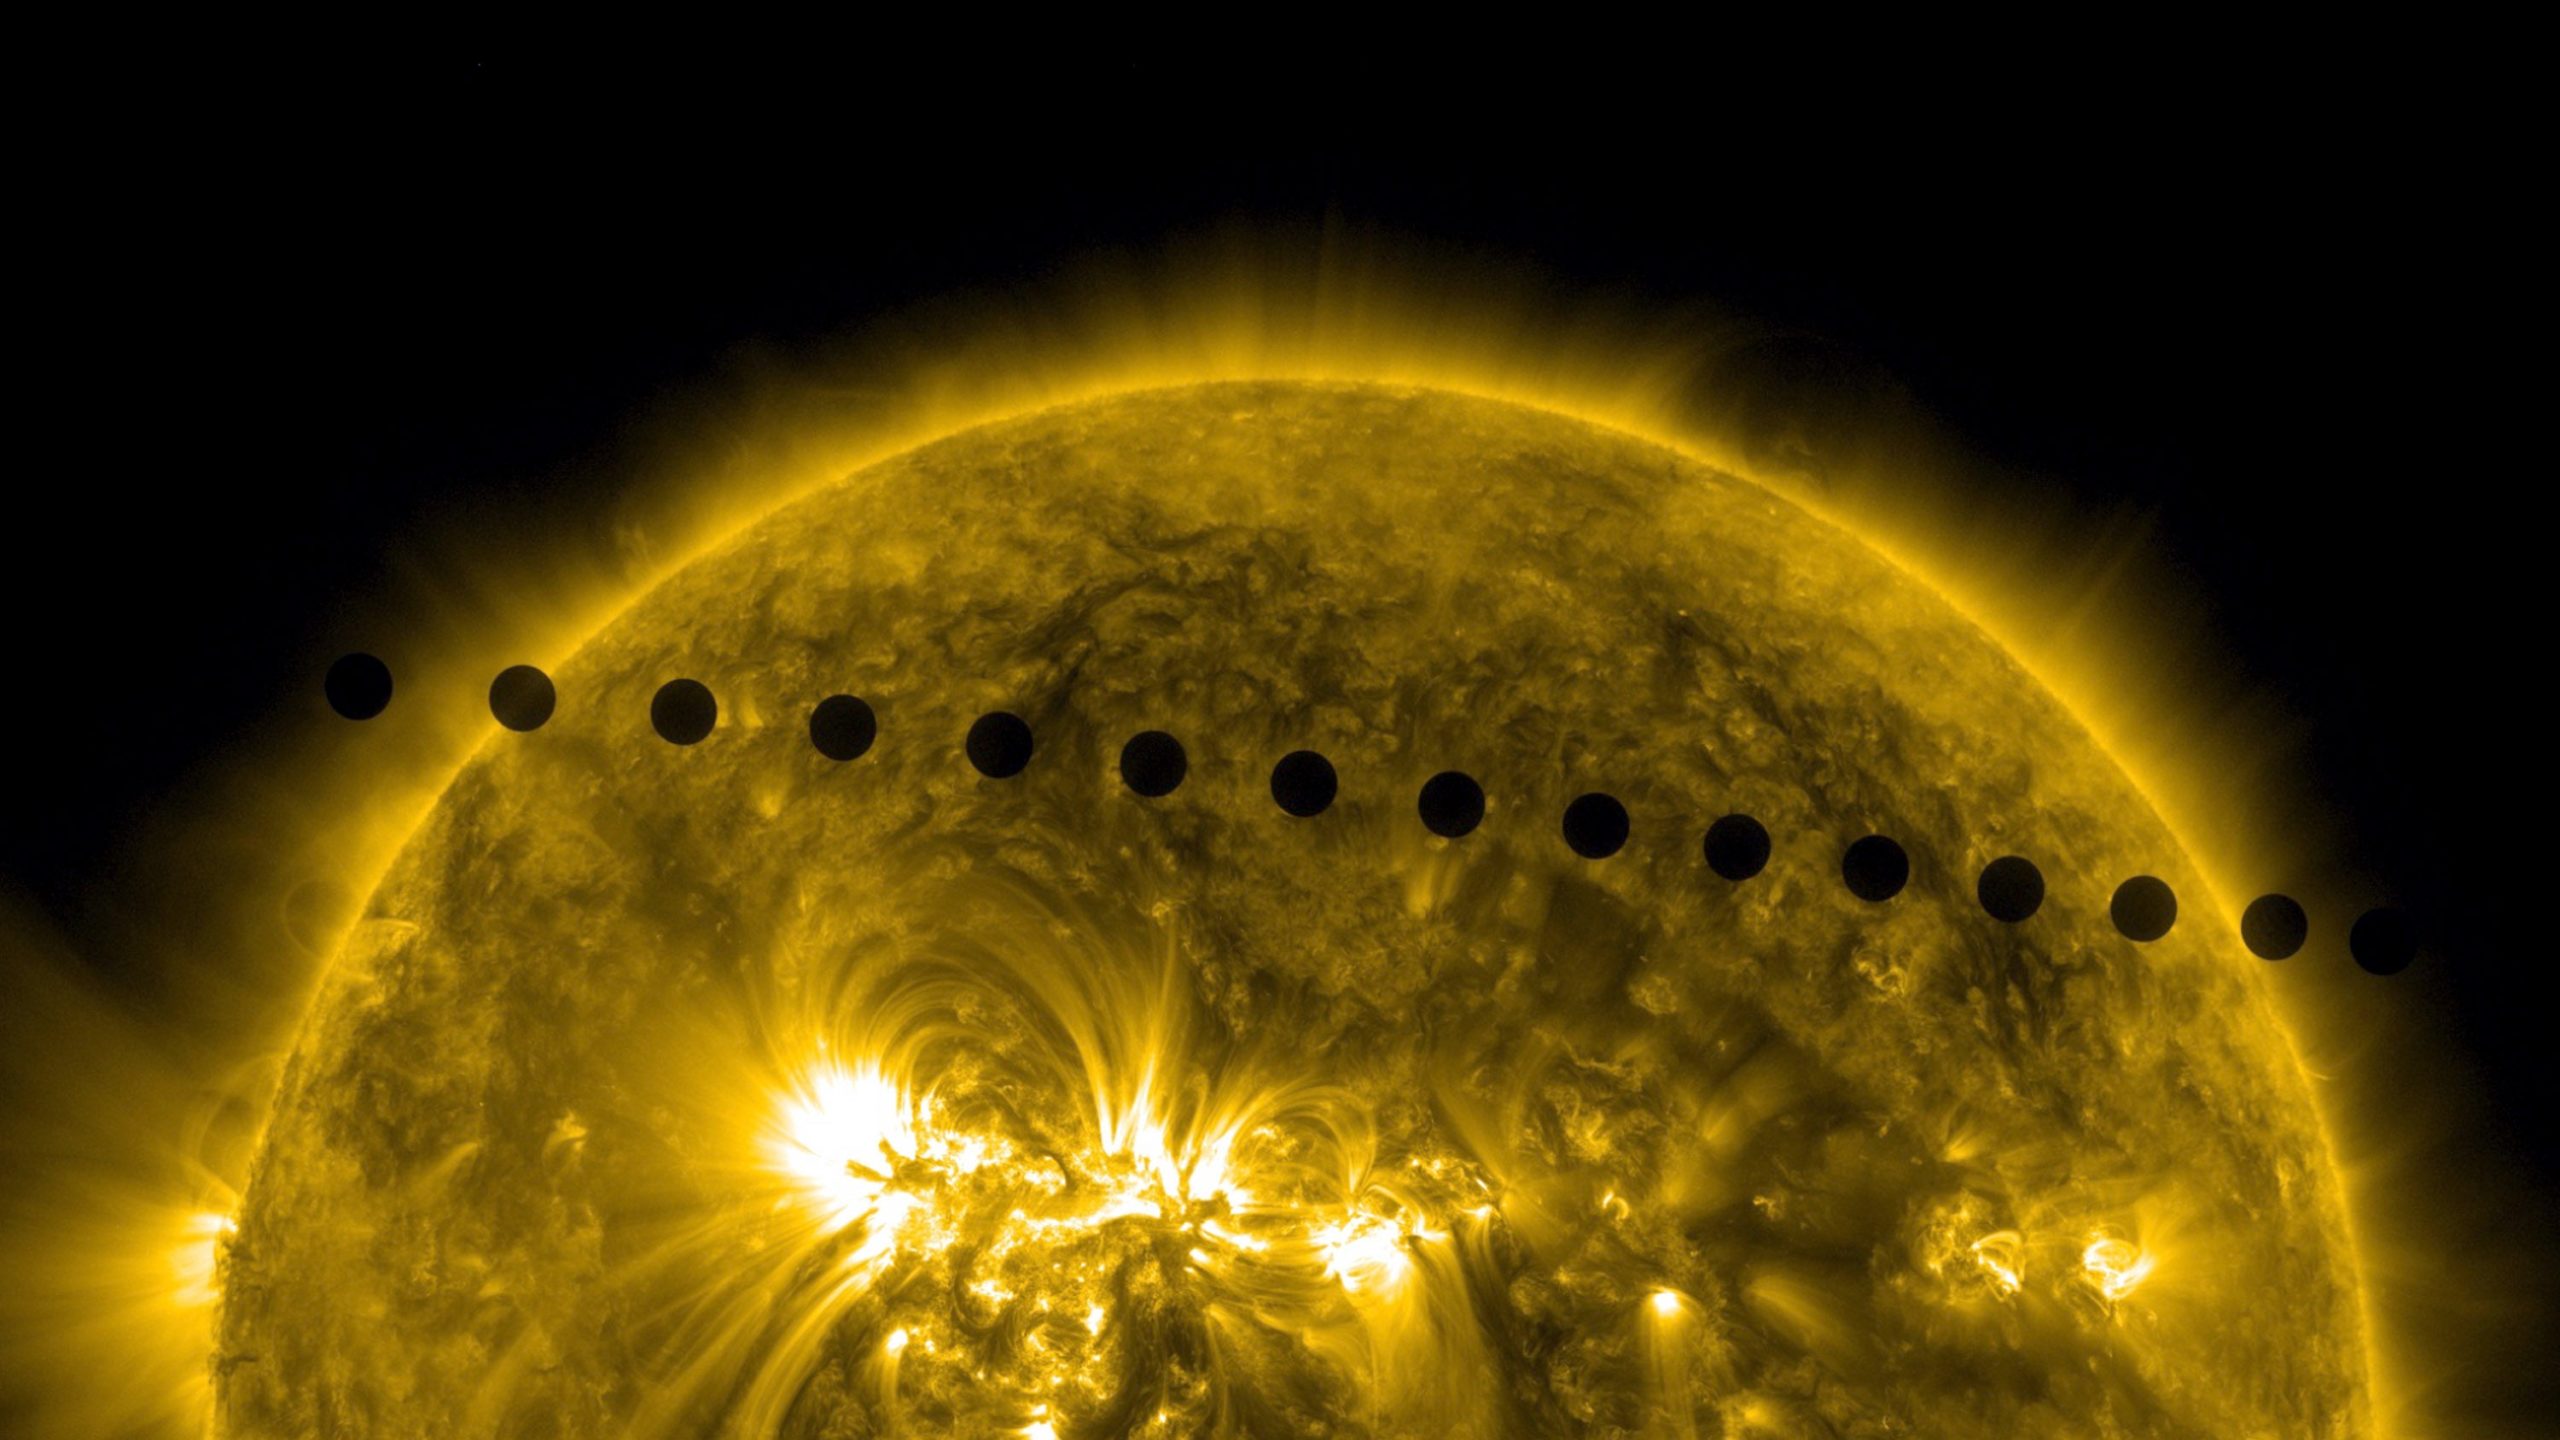 A false colour composite image of Venus's transit, taken by the SDO satellite in June 2012. (Image: SDO/NASA, Getty Images)